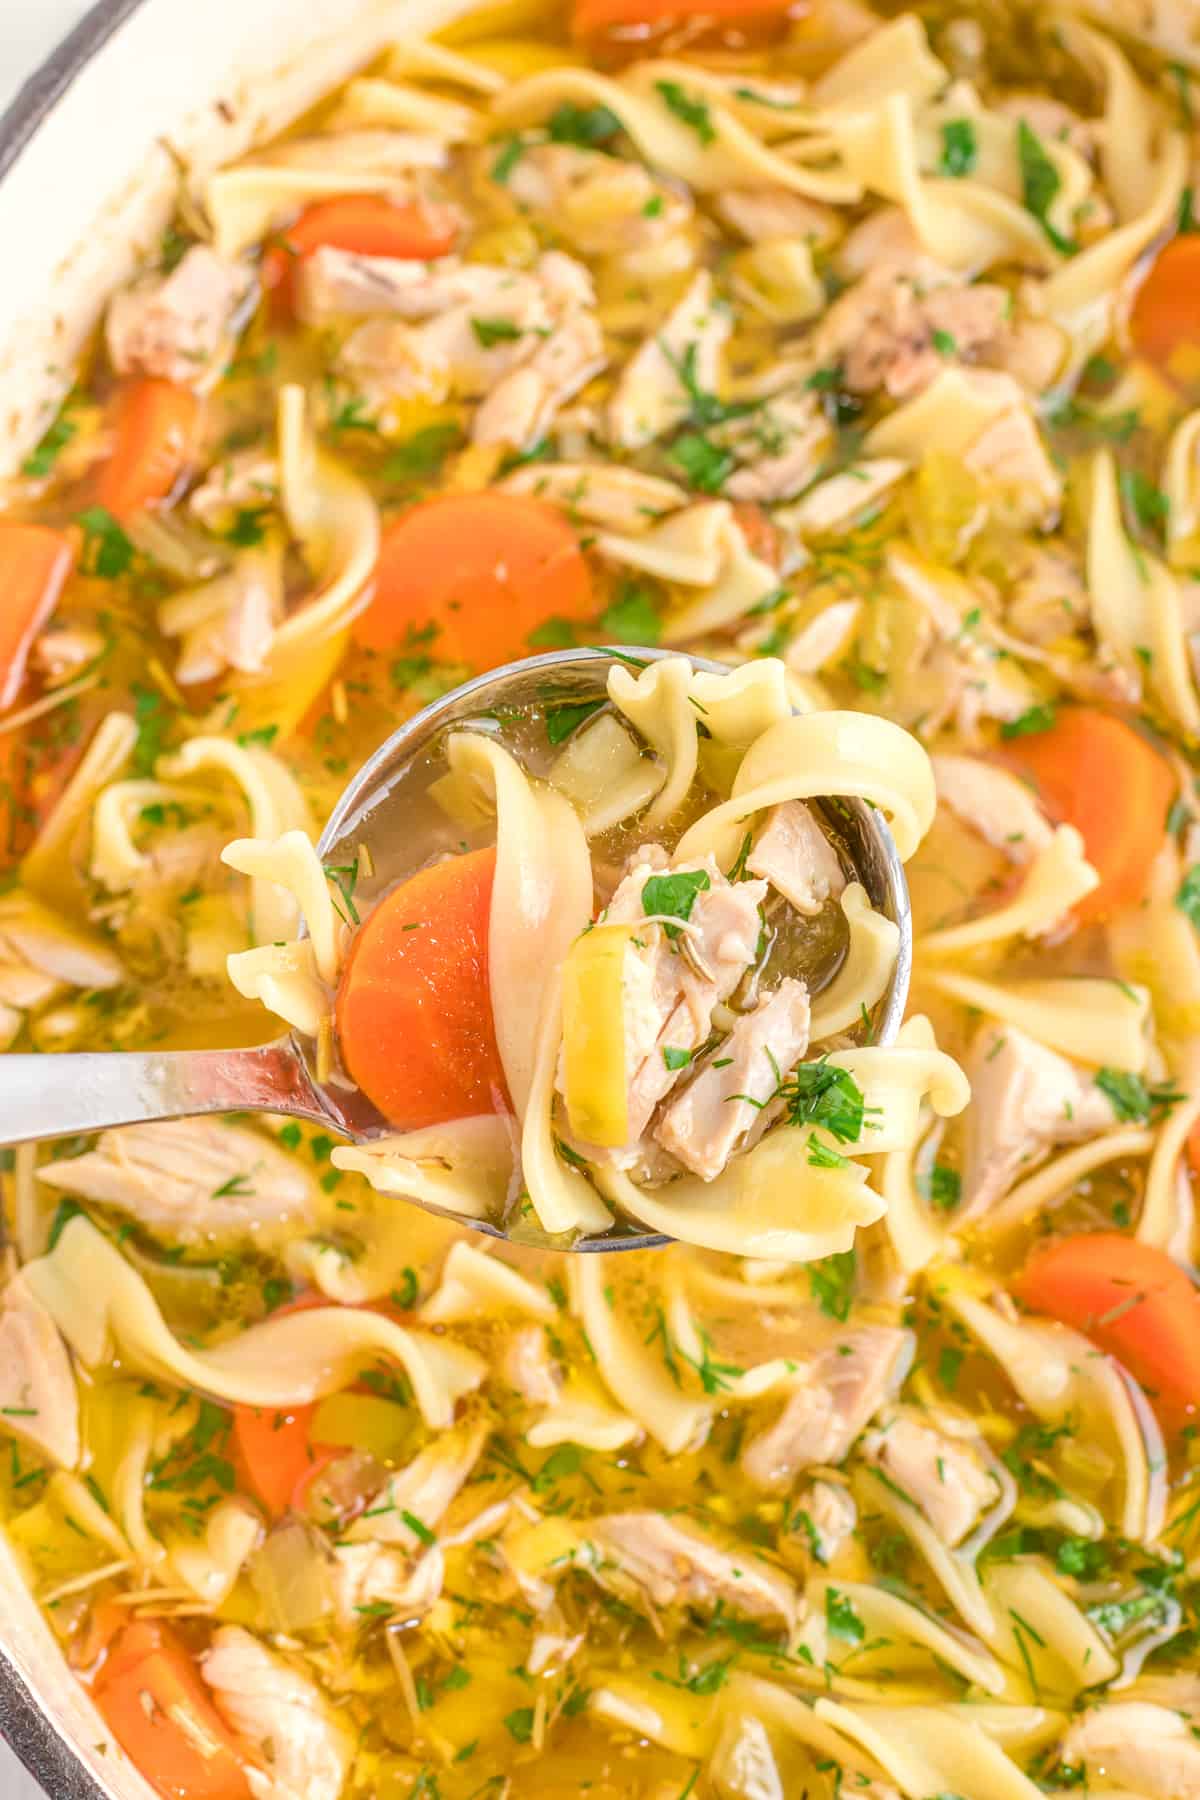 chicken noodle soup recipe best from scratch homestyle old fashioned healthy aneto broth